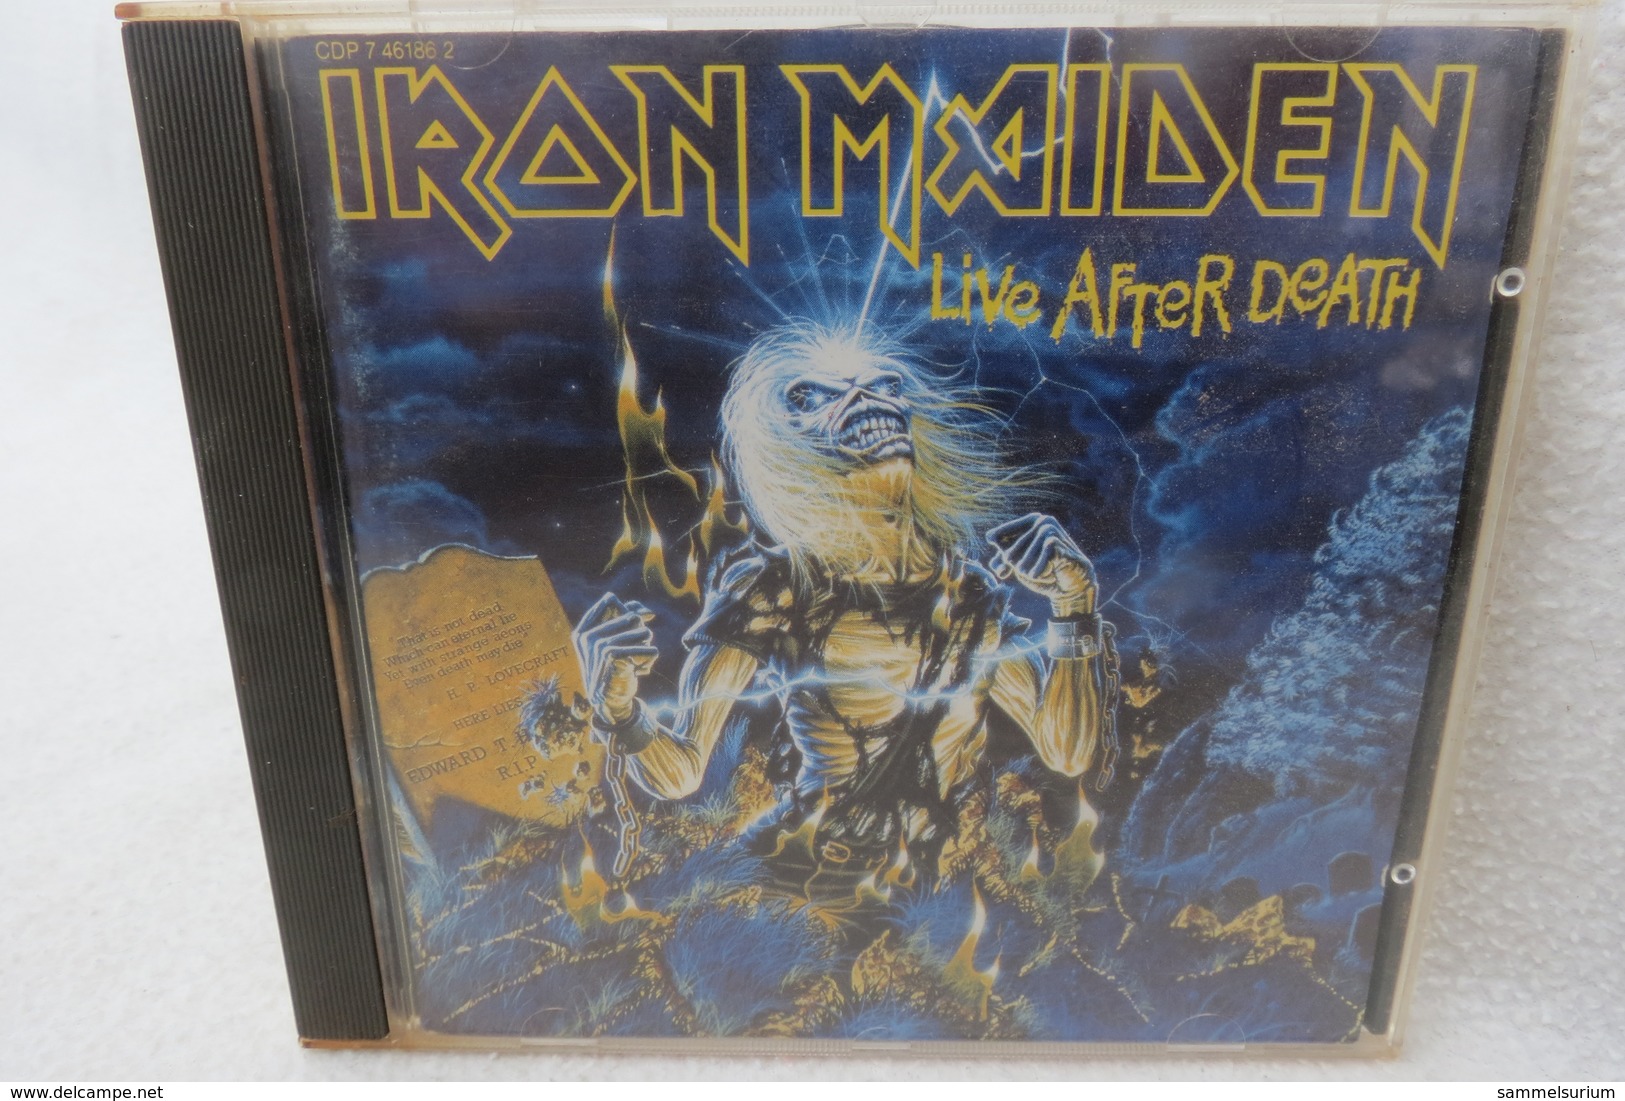 CD "Iron Maiden" Live After Death - Hard Rock & Metal